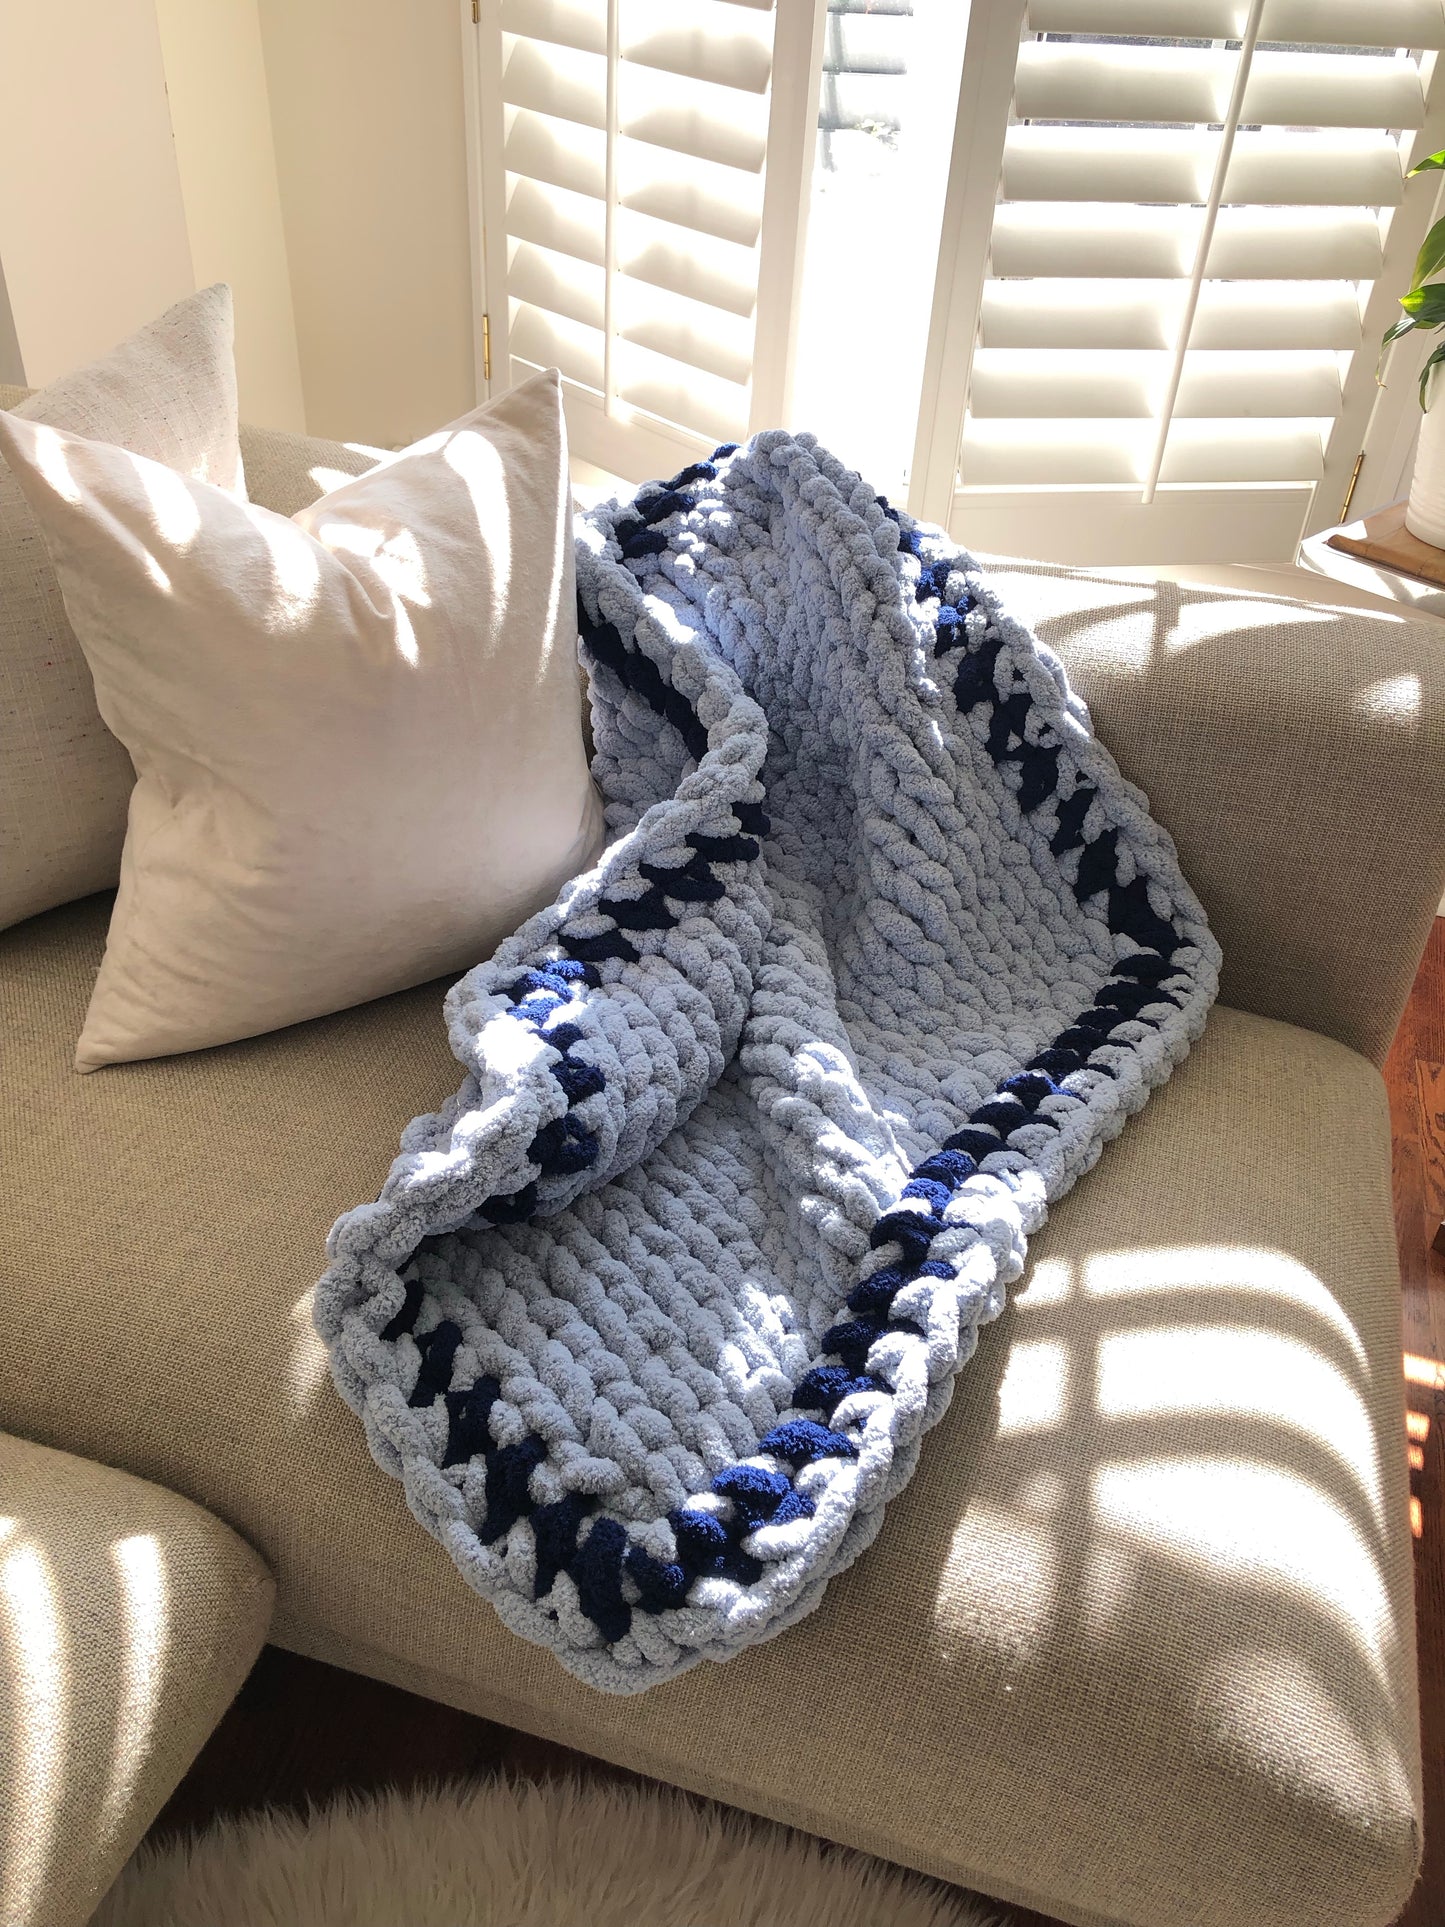 Healing Hand, Chunky Knit Baby Blankets - Light Blue Edged with Navy Blue Baseball Stitch